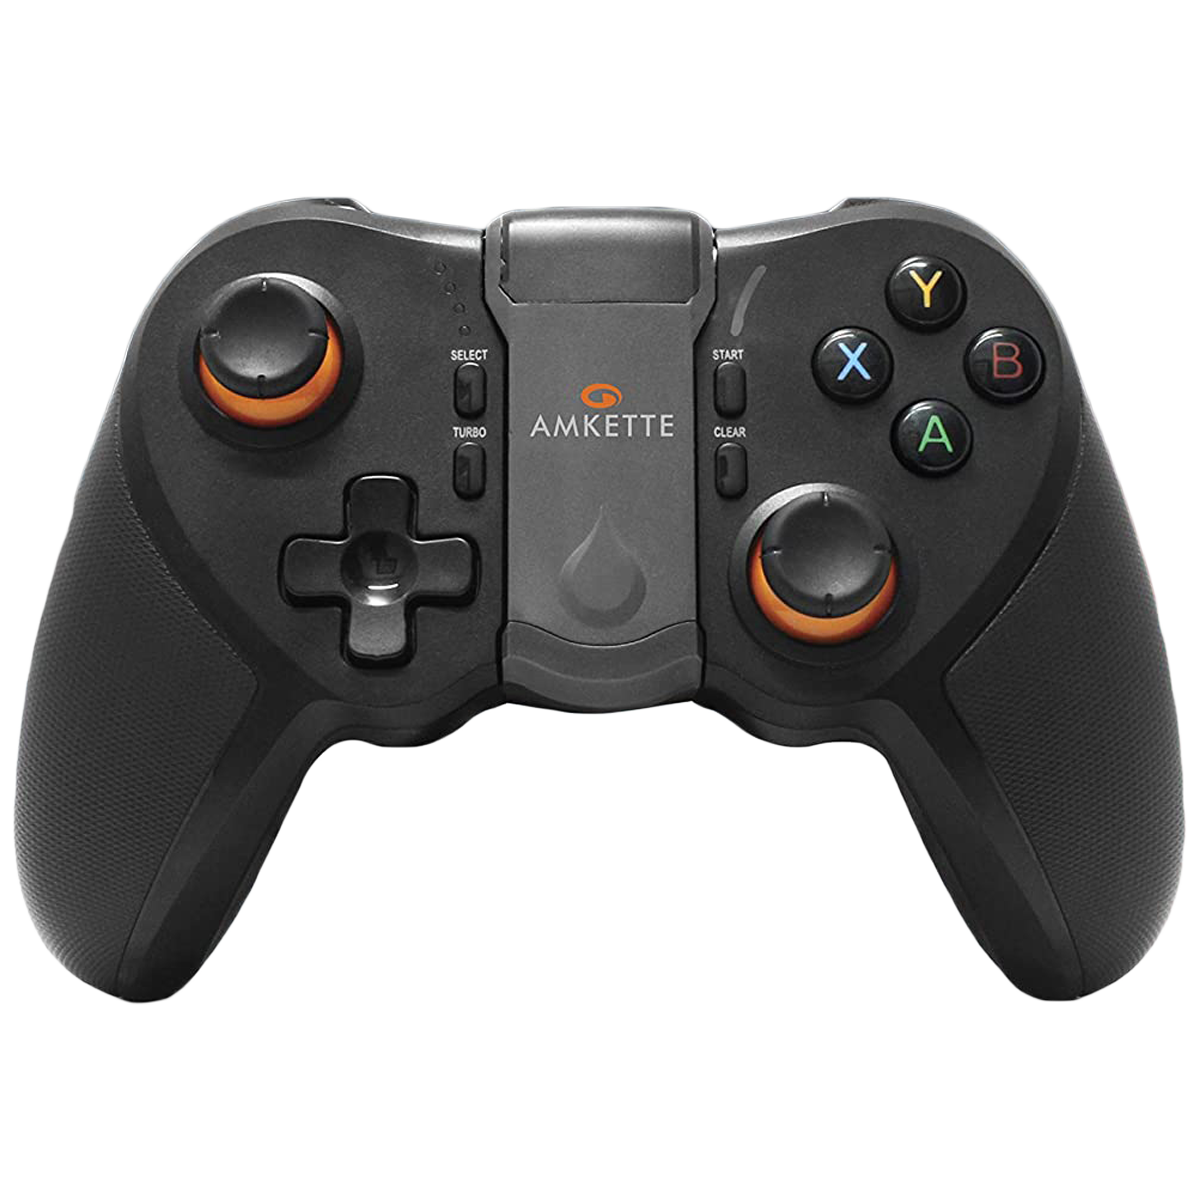 Amkette Evo Gamepad Pro 4 Gaming Controller For Android Phones (Instant Play for Android, EGP4 829BK, Black)_1